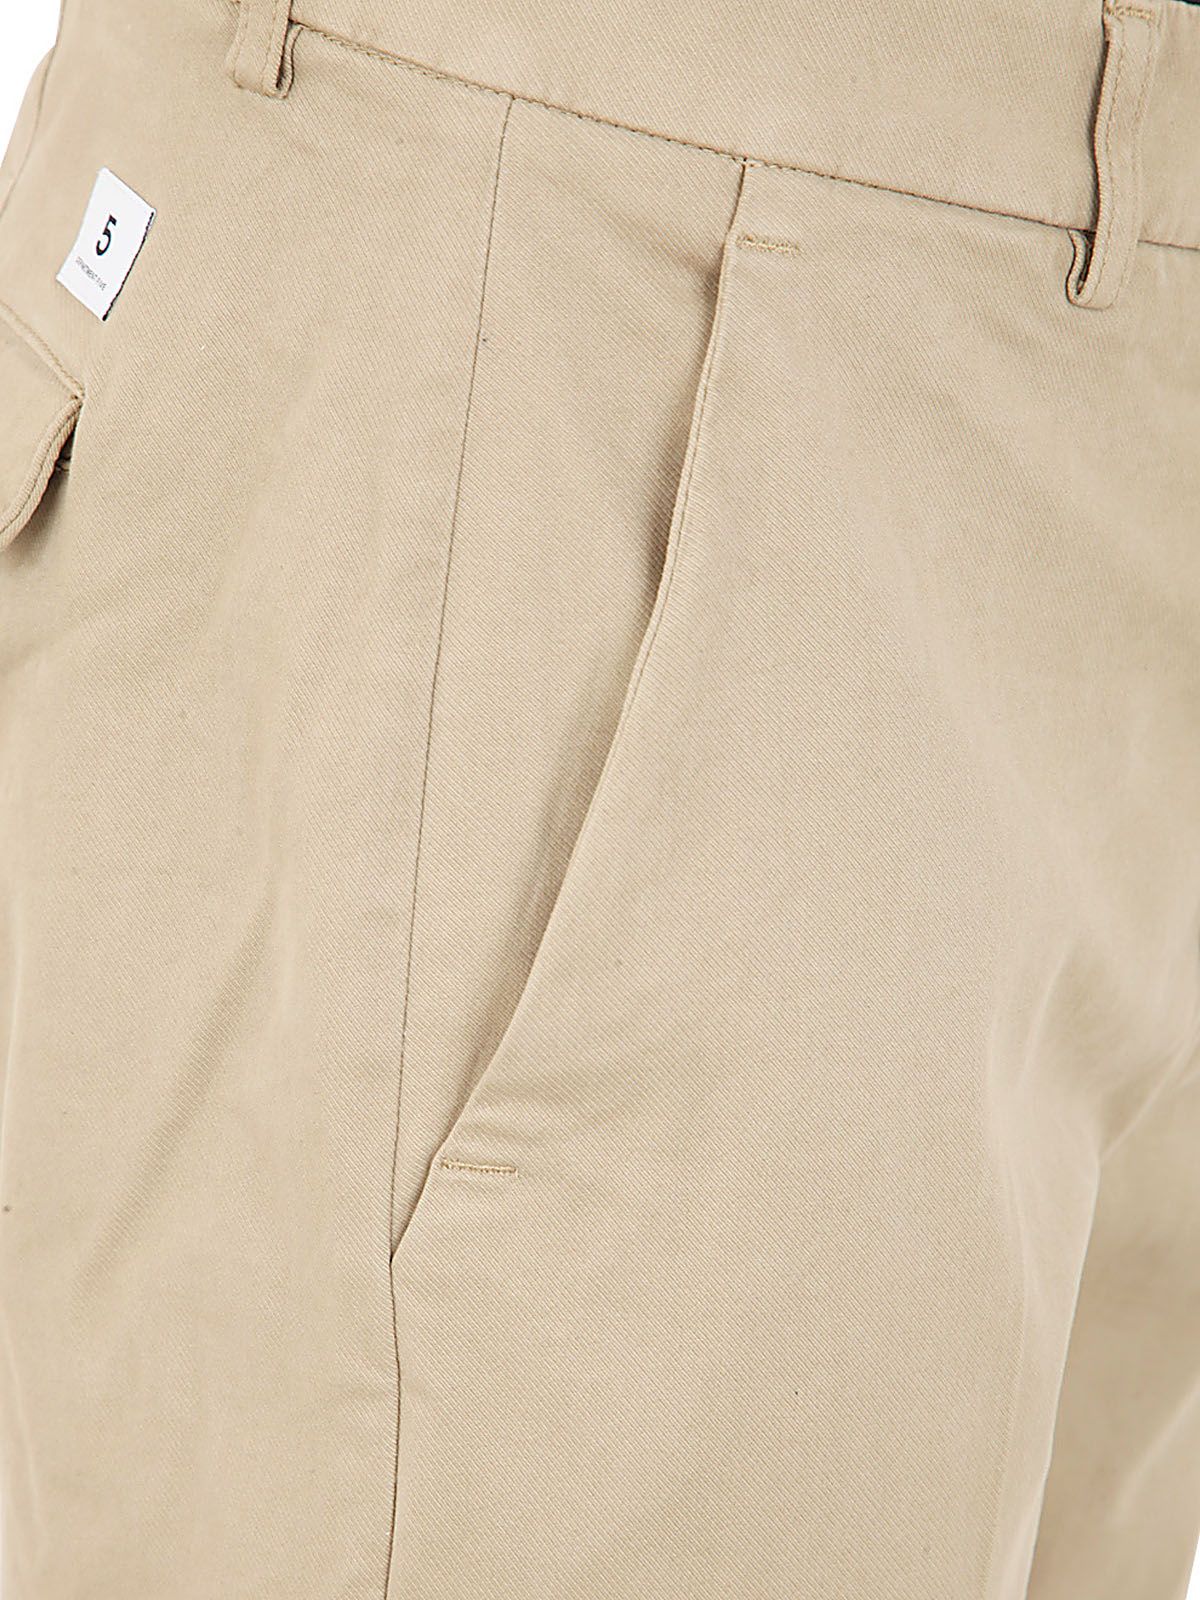 Shop Department Five Prince Chinos Crop Trousers